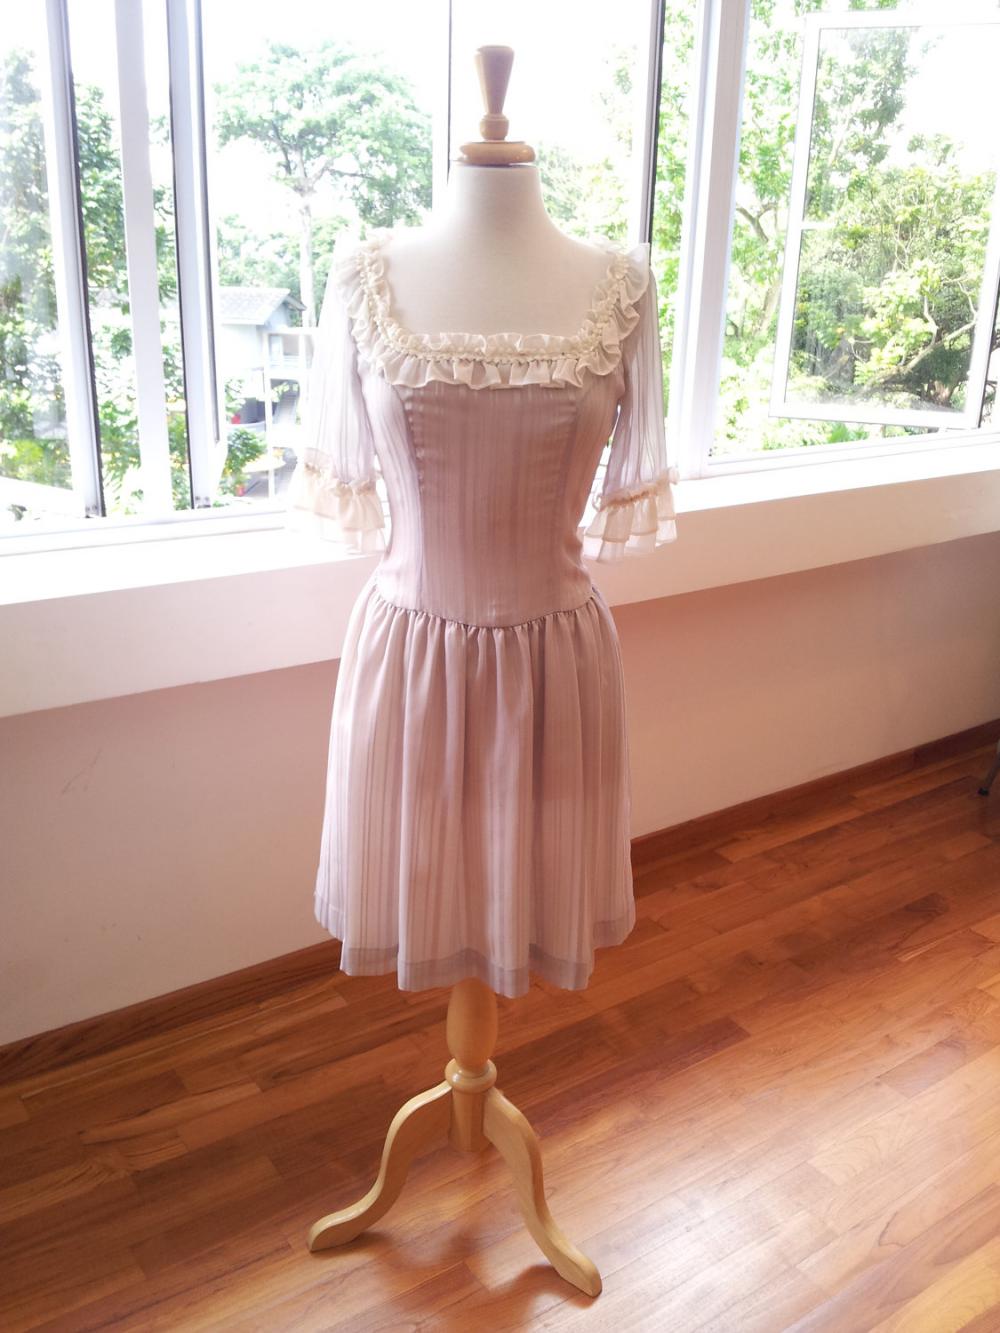 Marie Antoinette Dress - Romantic, Grey Dress With Lace And Silk Chiffon Trimming